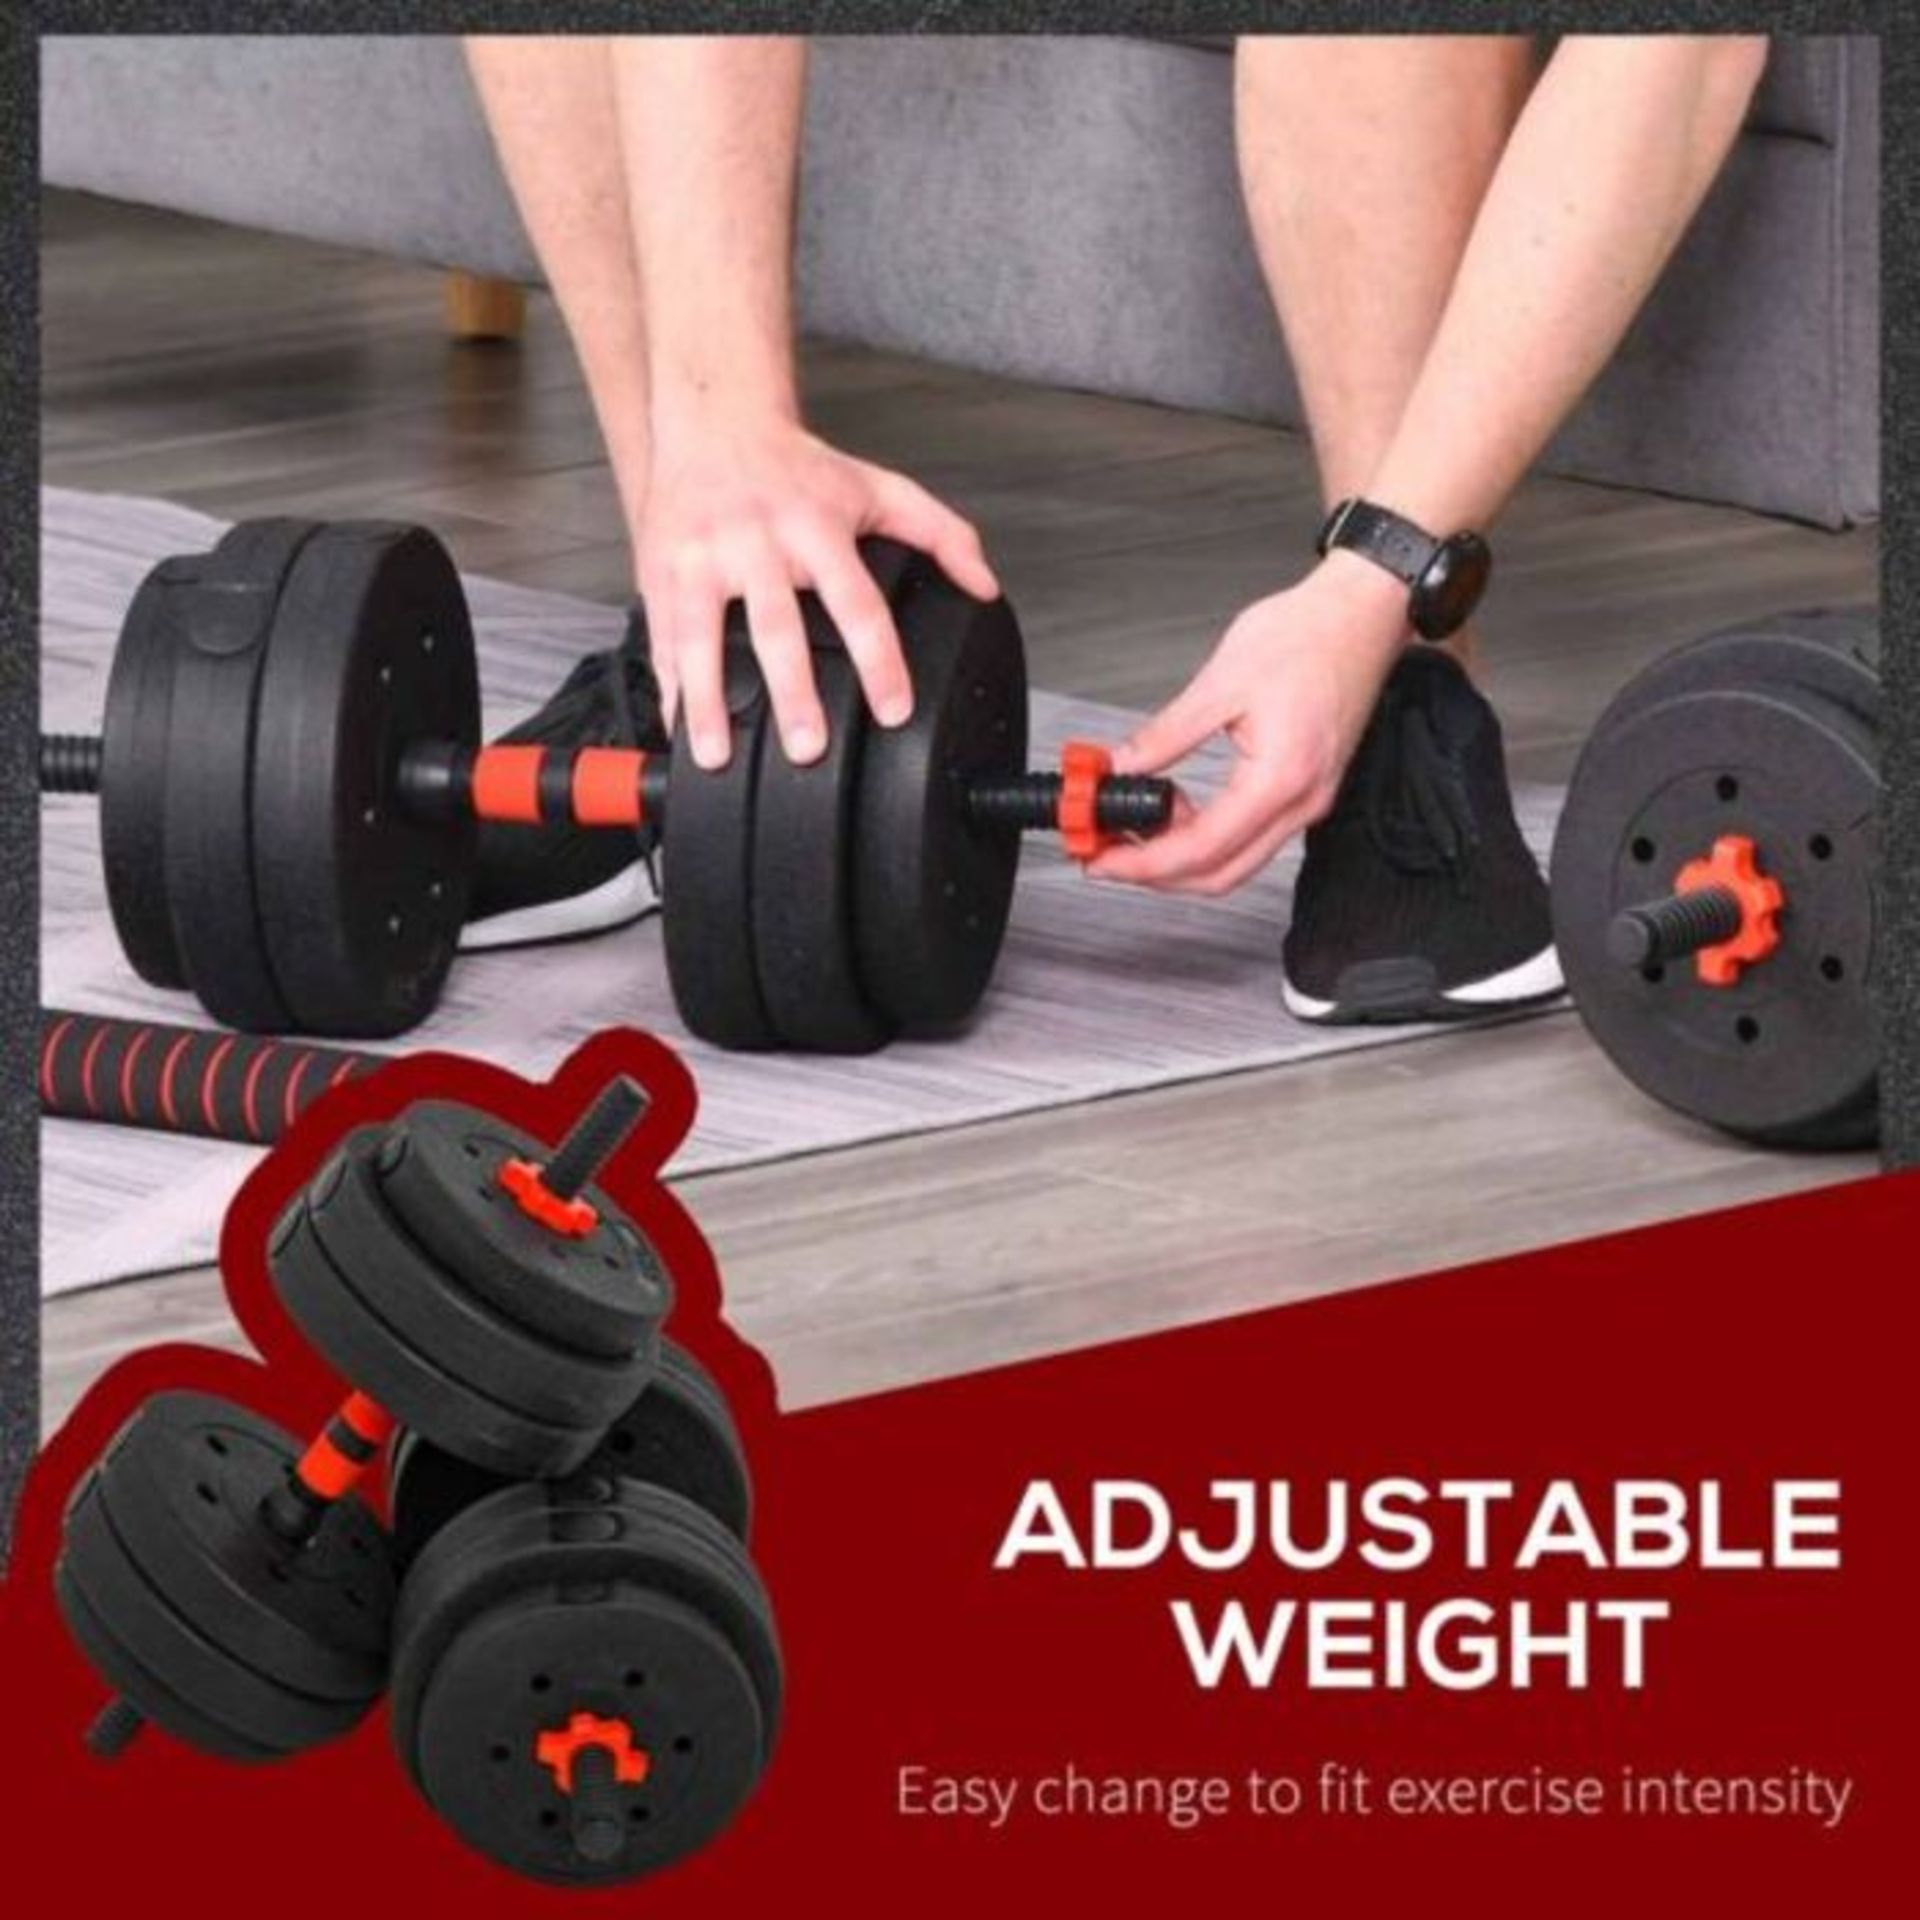 10x Hom Com 2 in1 Barbell/Dumb bell 30kg weight set, new and boxed, Similar sets retail at around - Image 2 of 4